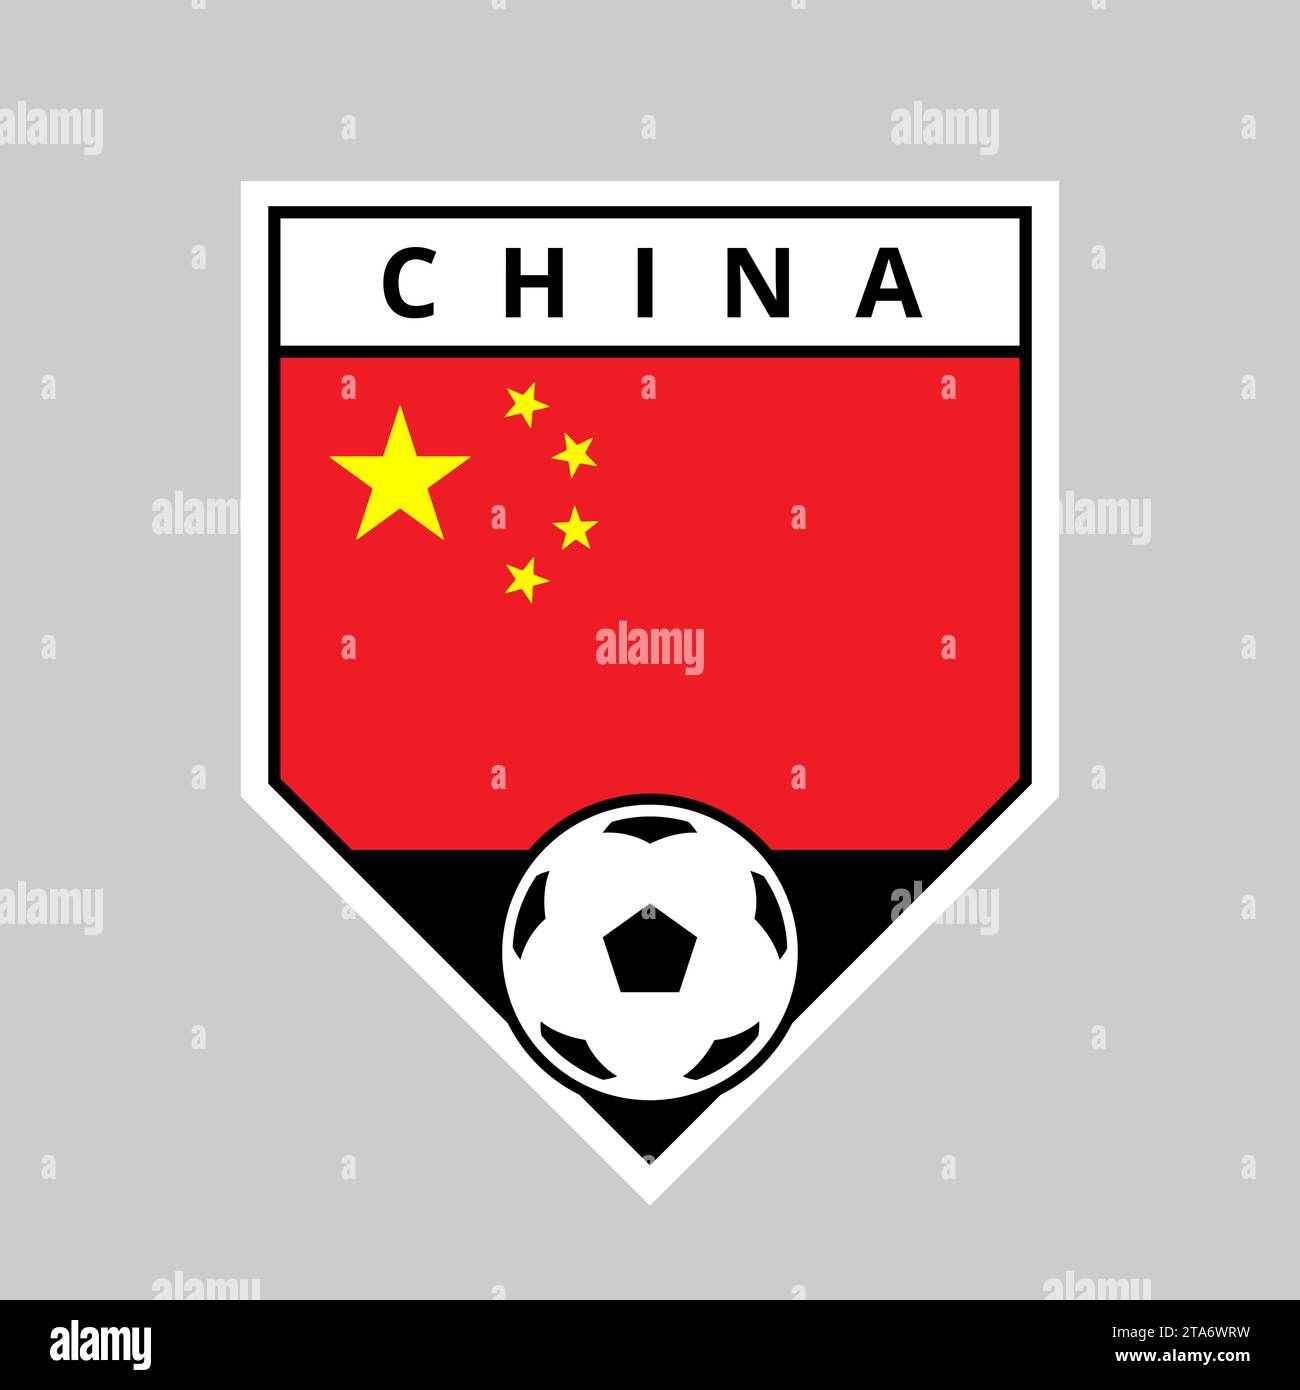 Illustration of Angled Shield Team Badge of China for Football Tournament Stock Vector